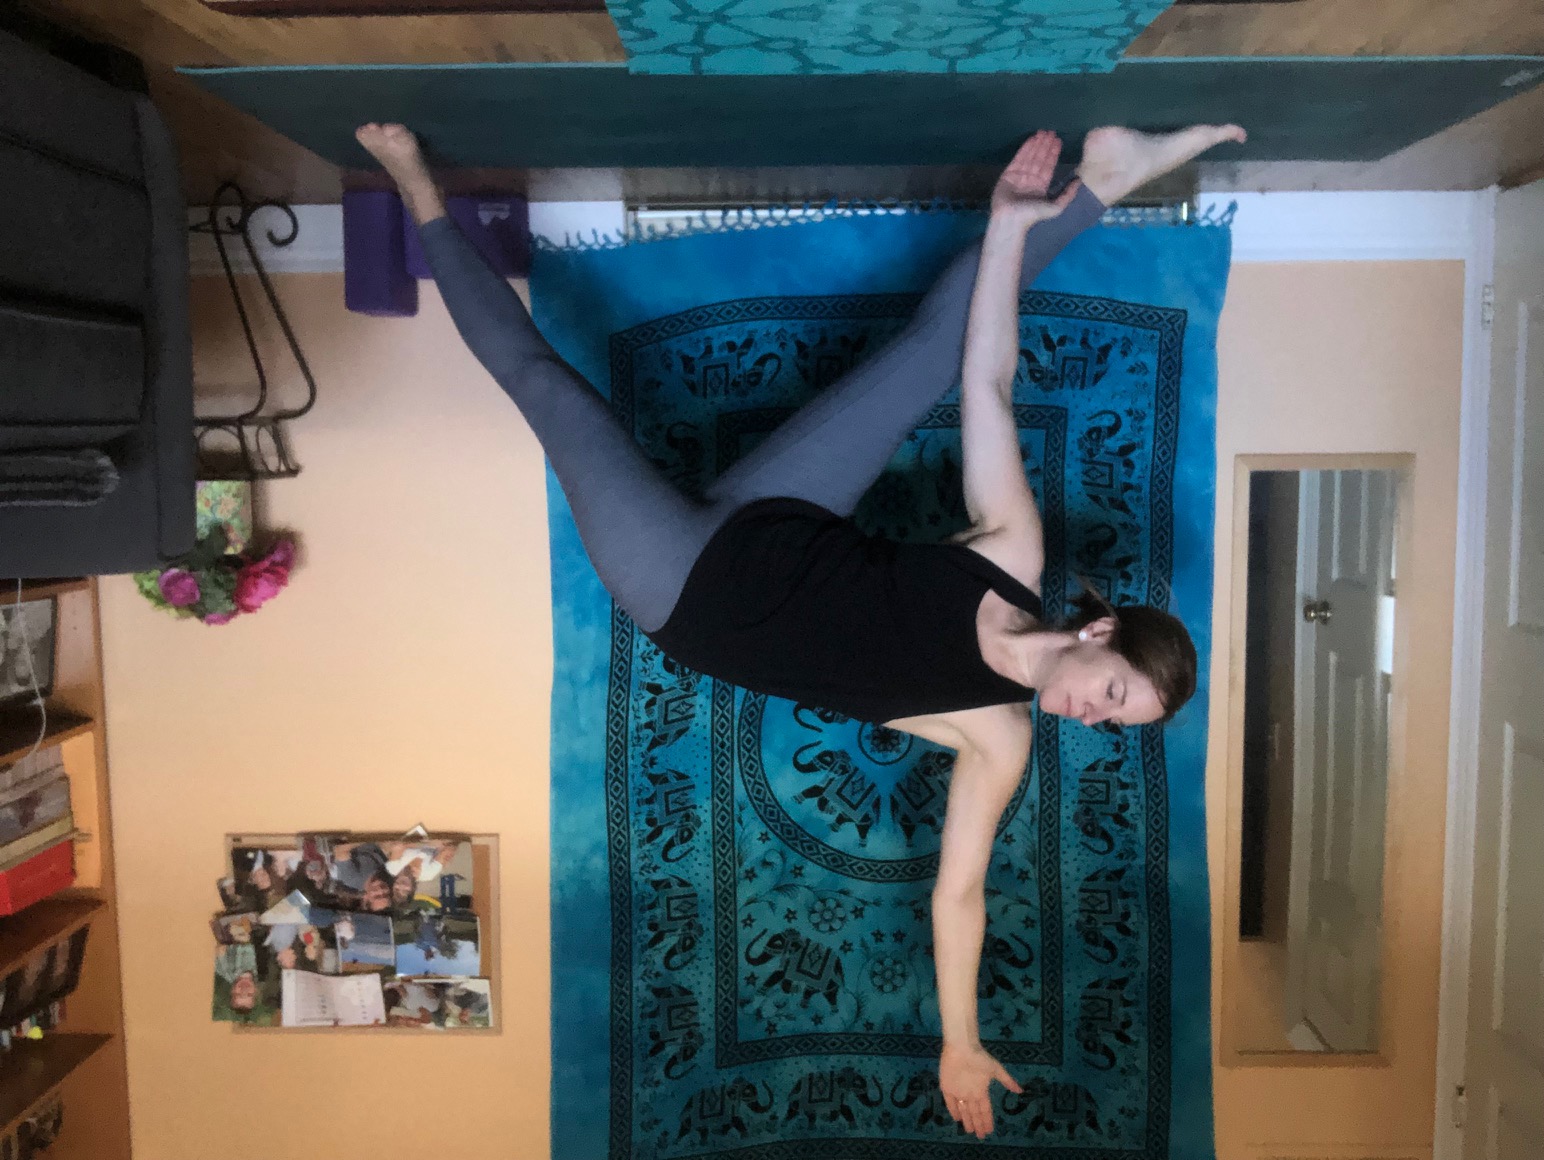 I wanted to say thank you for the beautiful tapestries we received a few weeks ago. Being a Yoga teacher, I now use this as a backdrop for my Yoga classes. it looks beautiful!